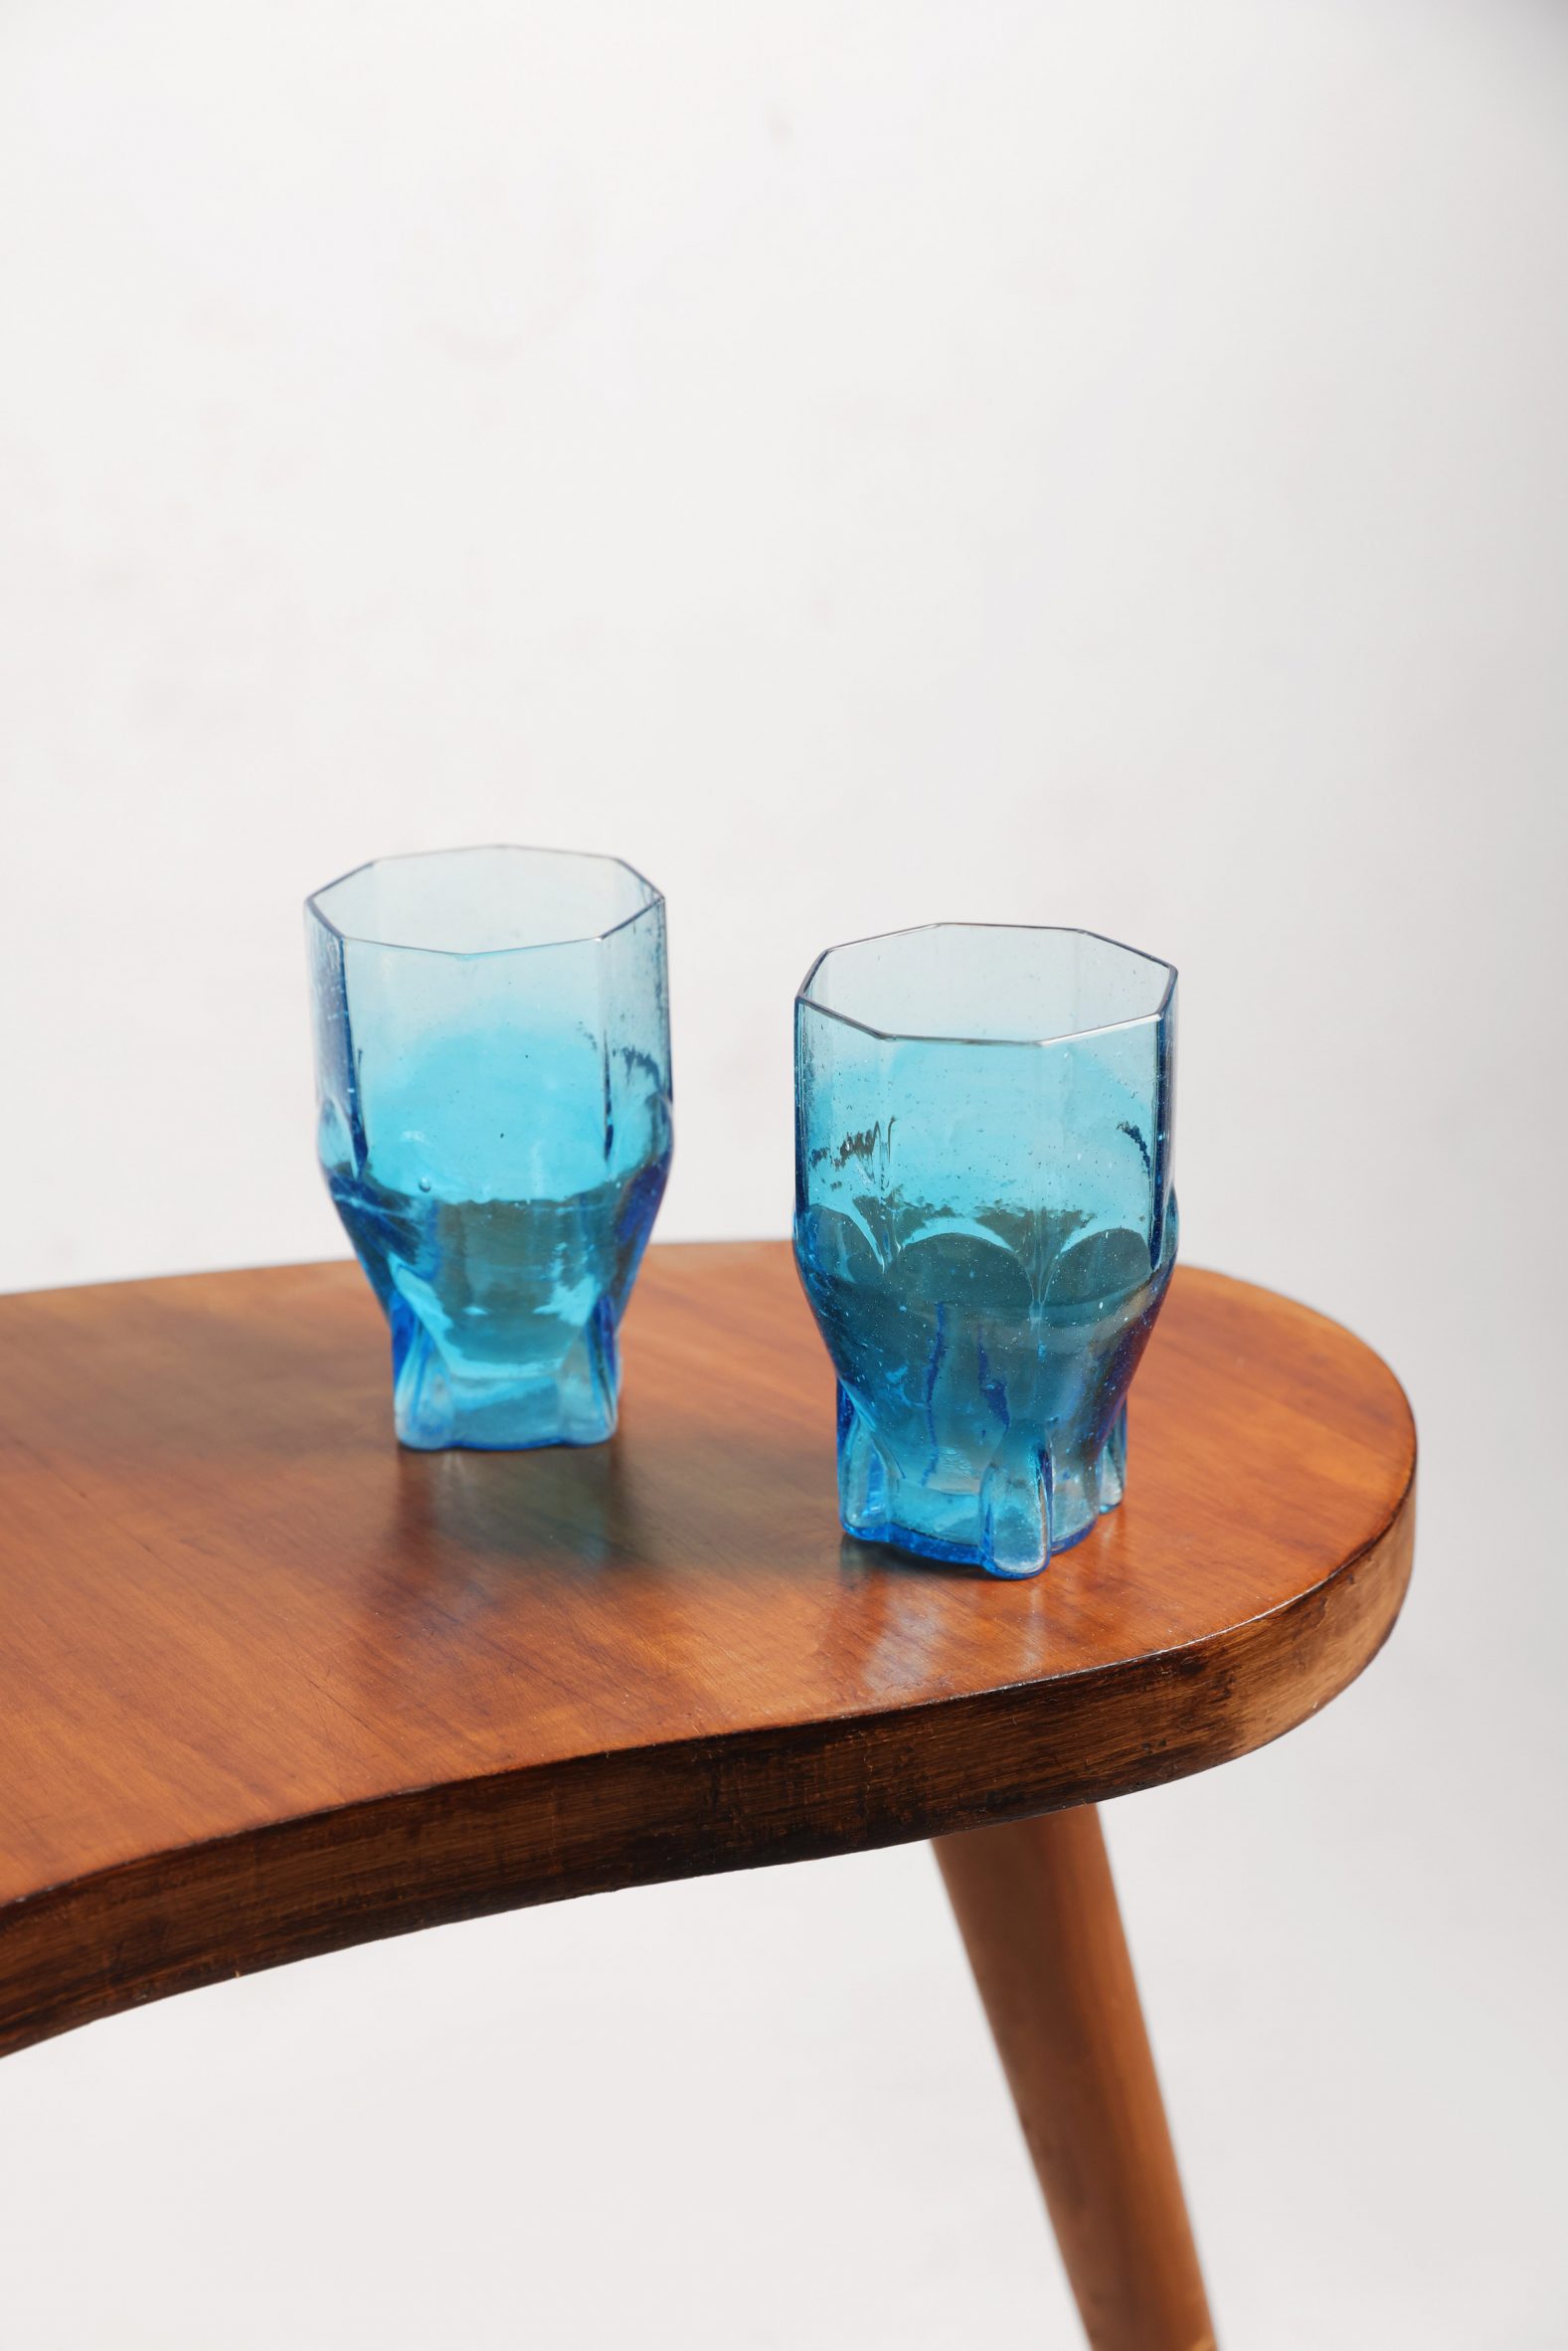 Two drinking glasses on a table